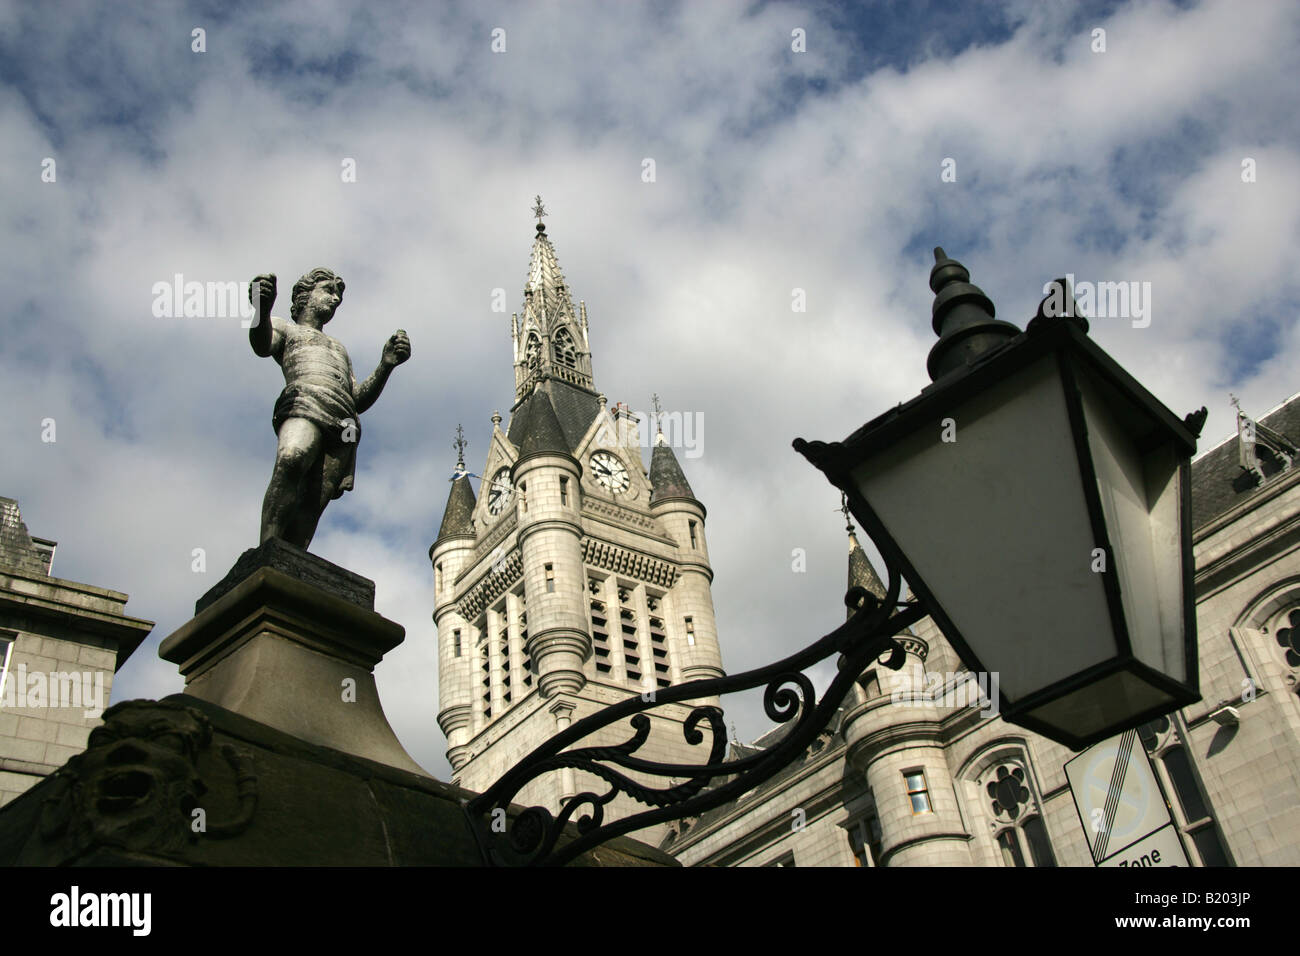 City of Aberdeen, Scotland. The Mannie statue at Castlegate Well with the Town House clock tower in the background. Stock Photo